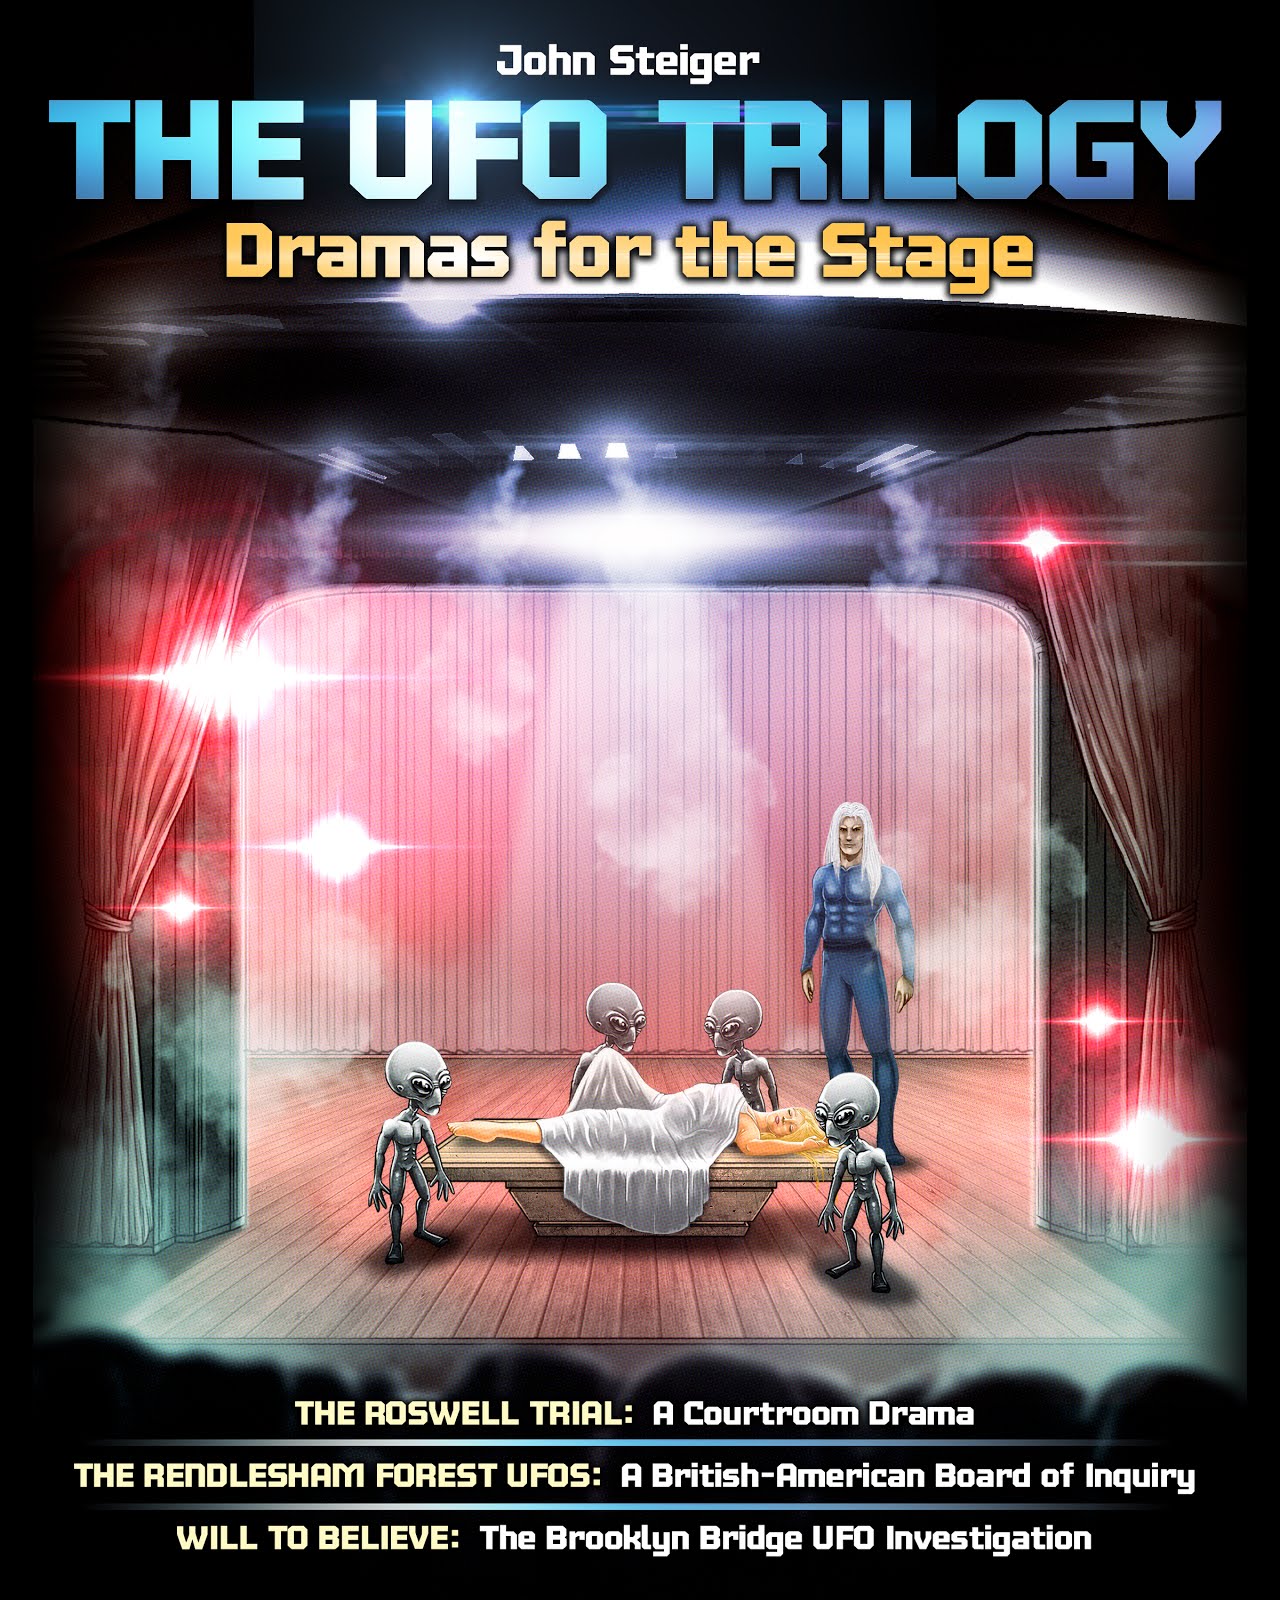 THE UFO TRILOGY - Dramas For The Stage